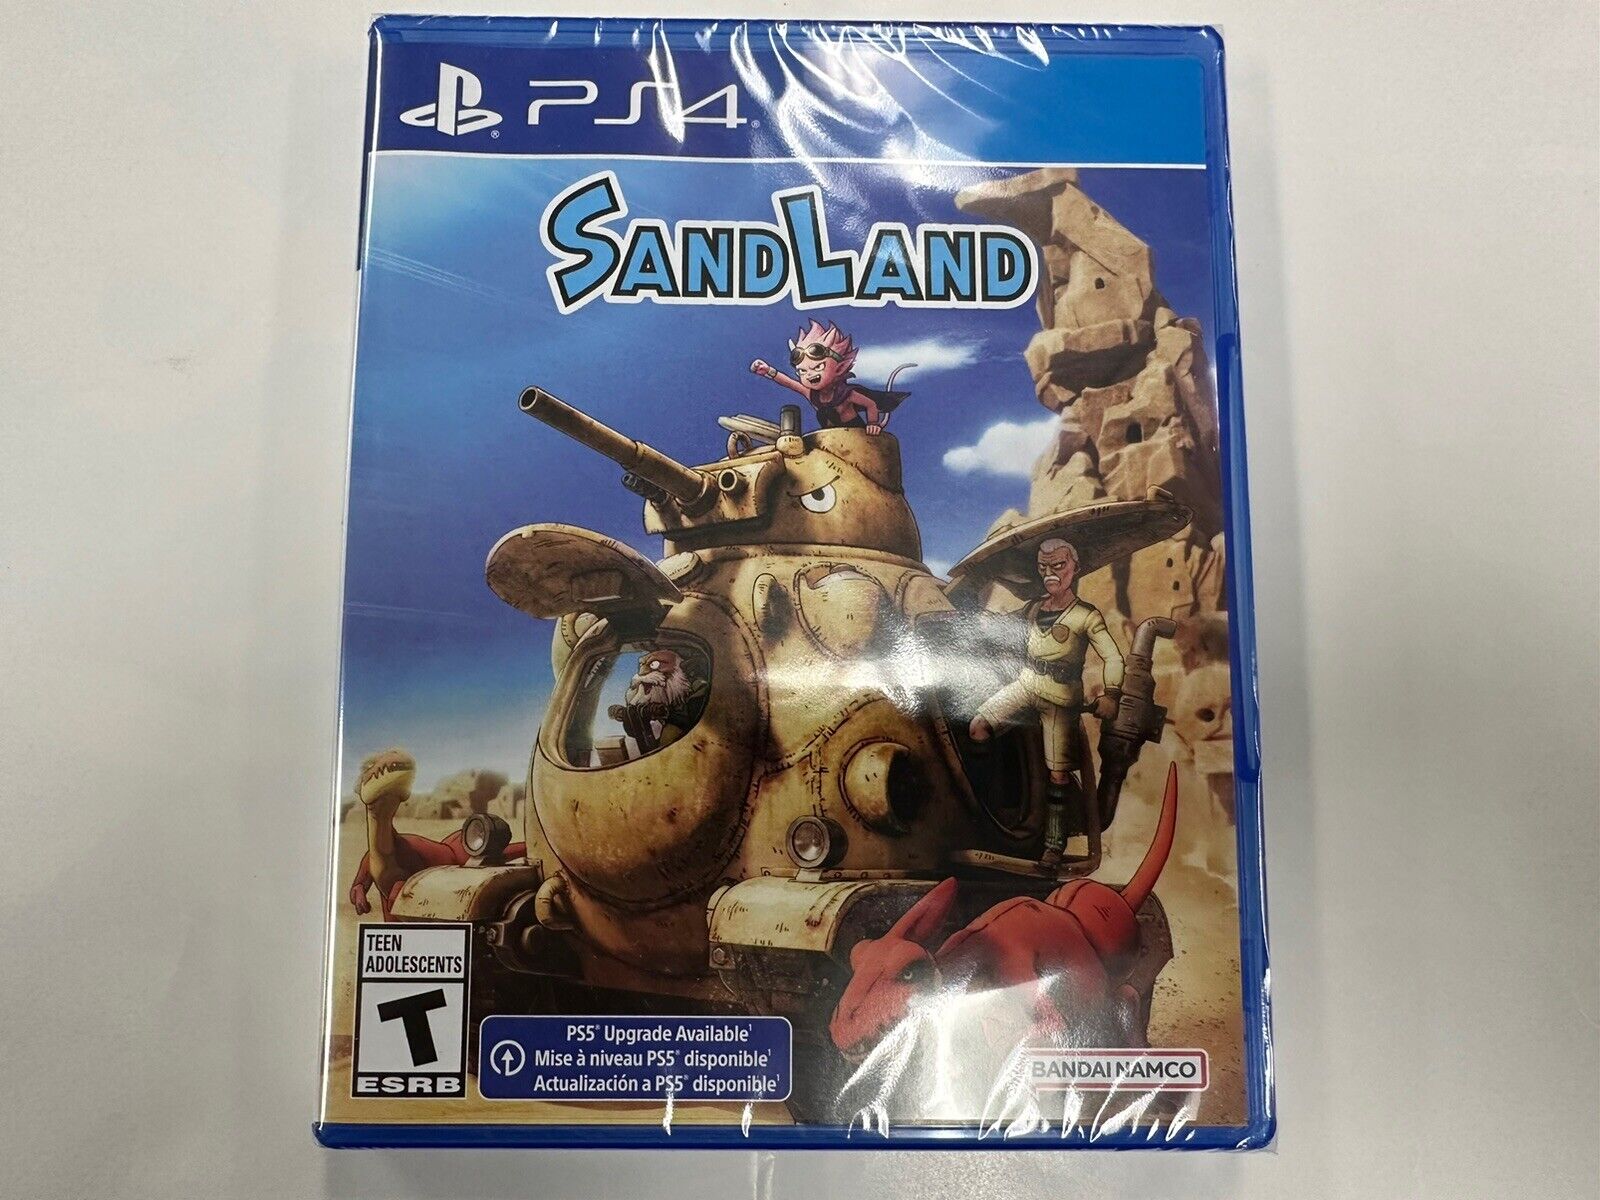 Sand Land (PS4 / PlayStation 4) BRAND NEW